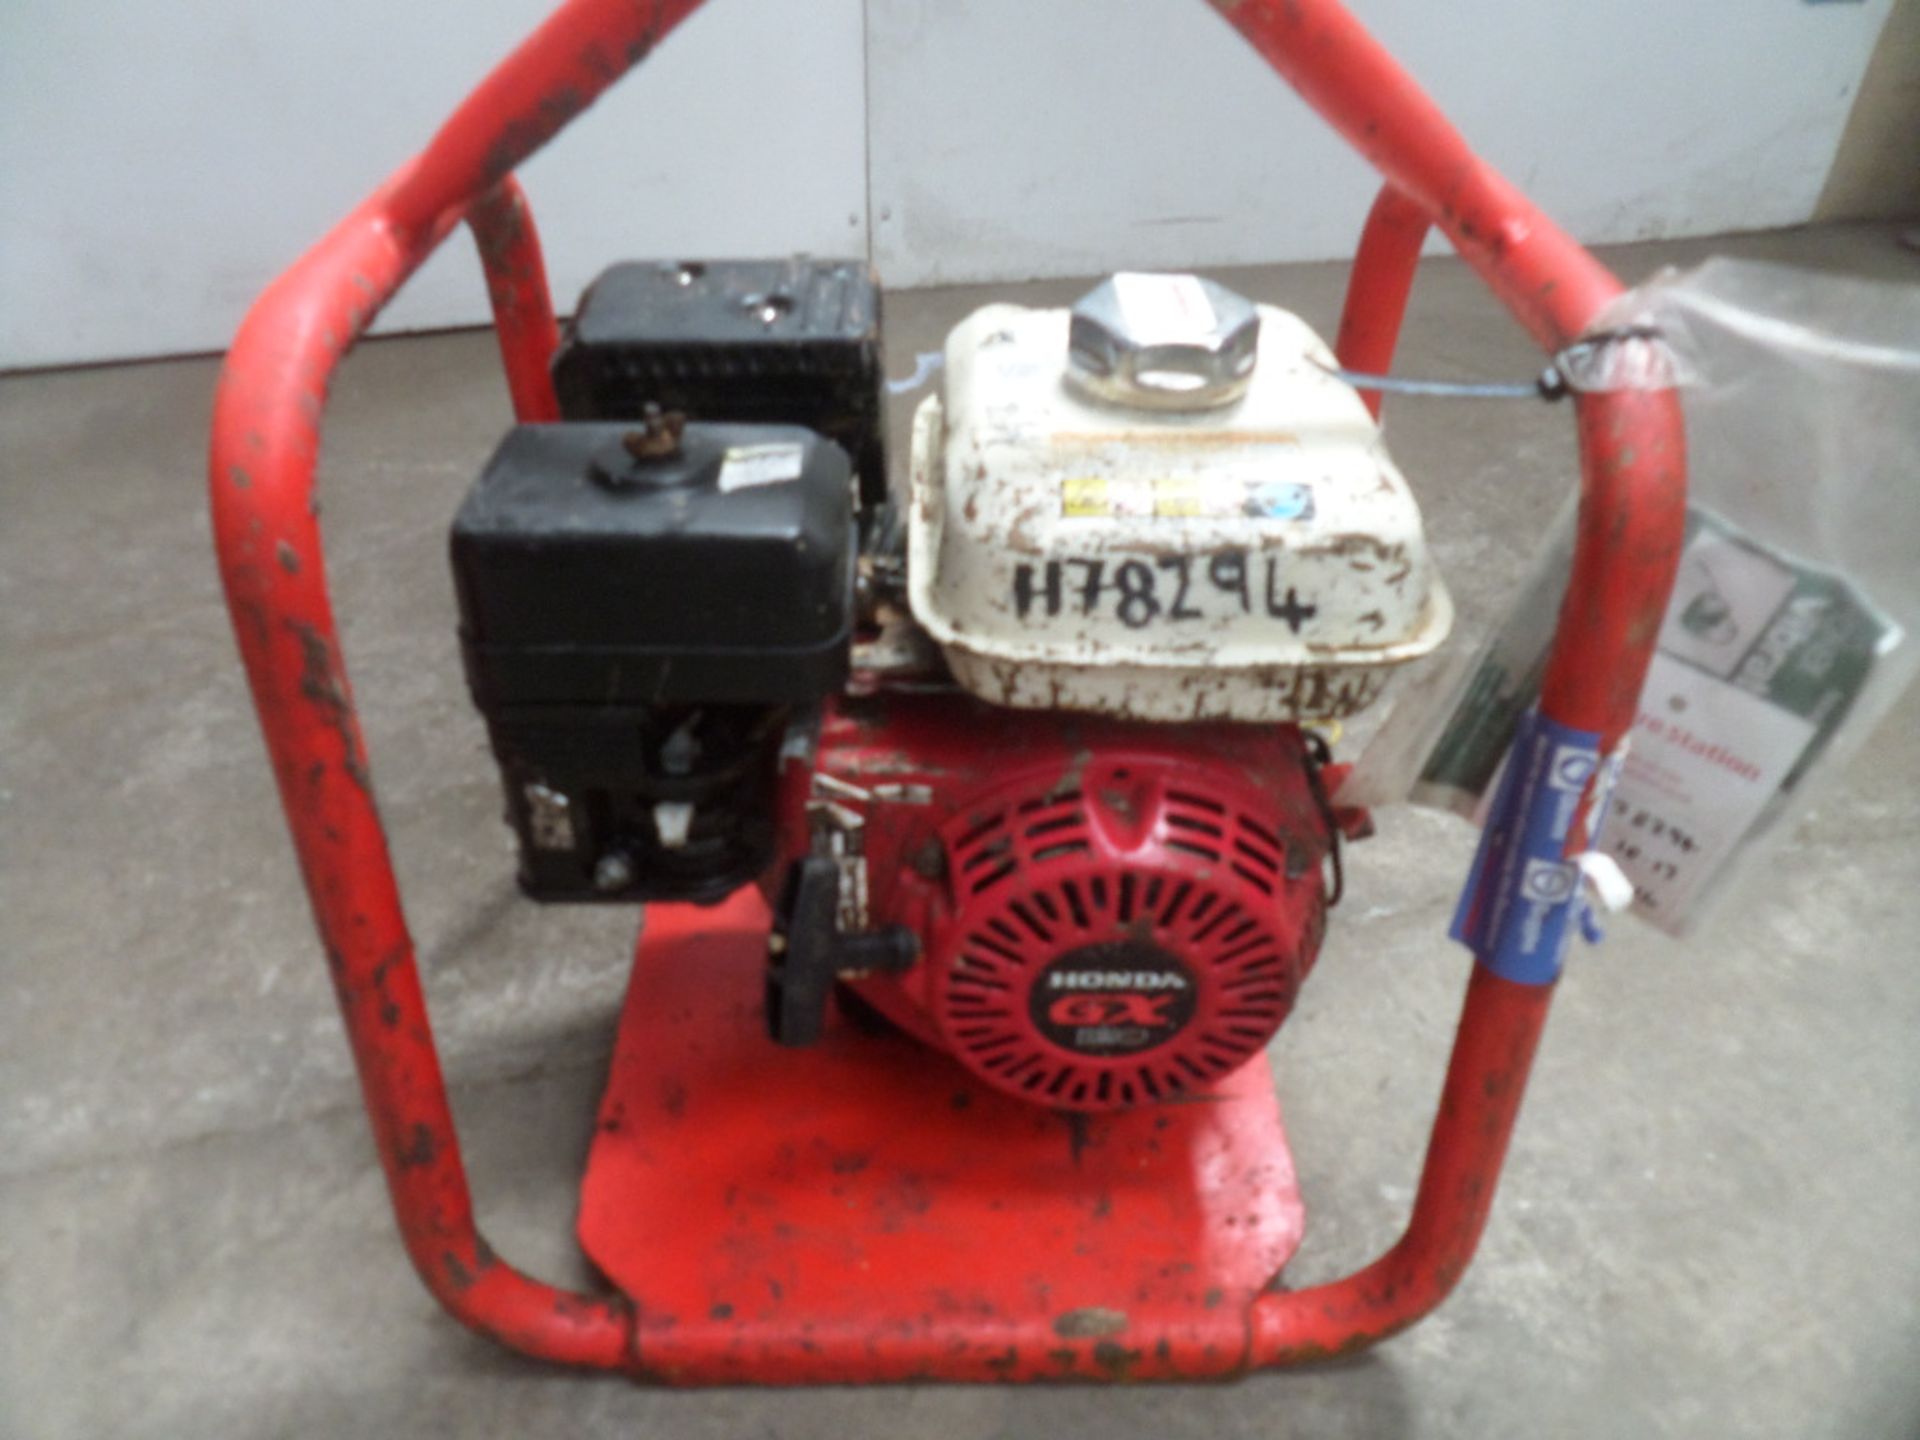 HONDA  {027716} POKER CONCRETE DRIVE UNIT Petrol powered by Honda GX120 engine and is working fine - - Image 2 of 2